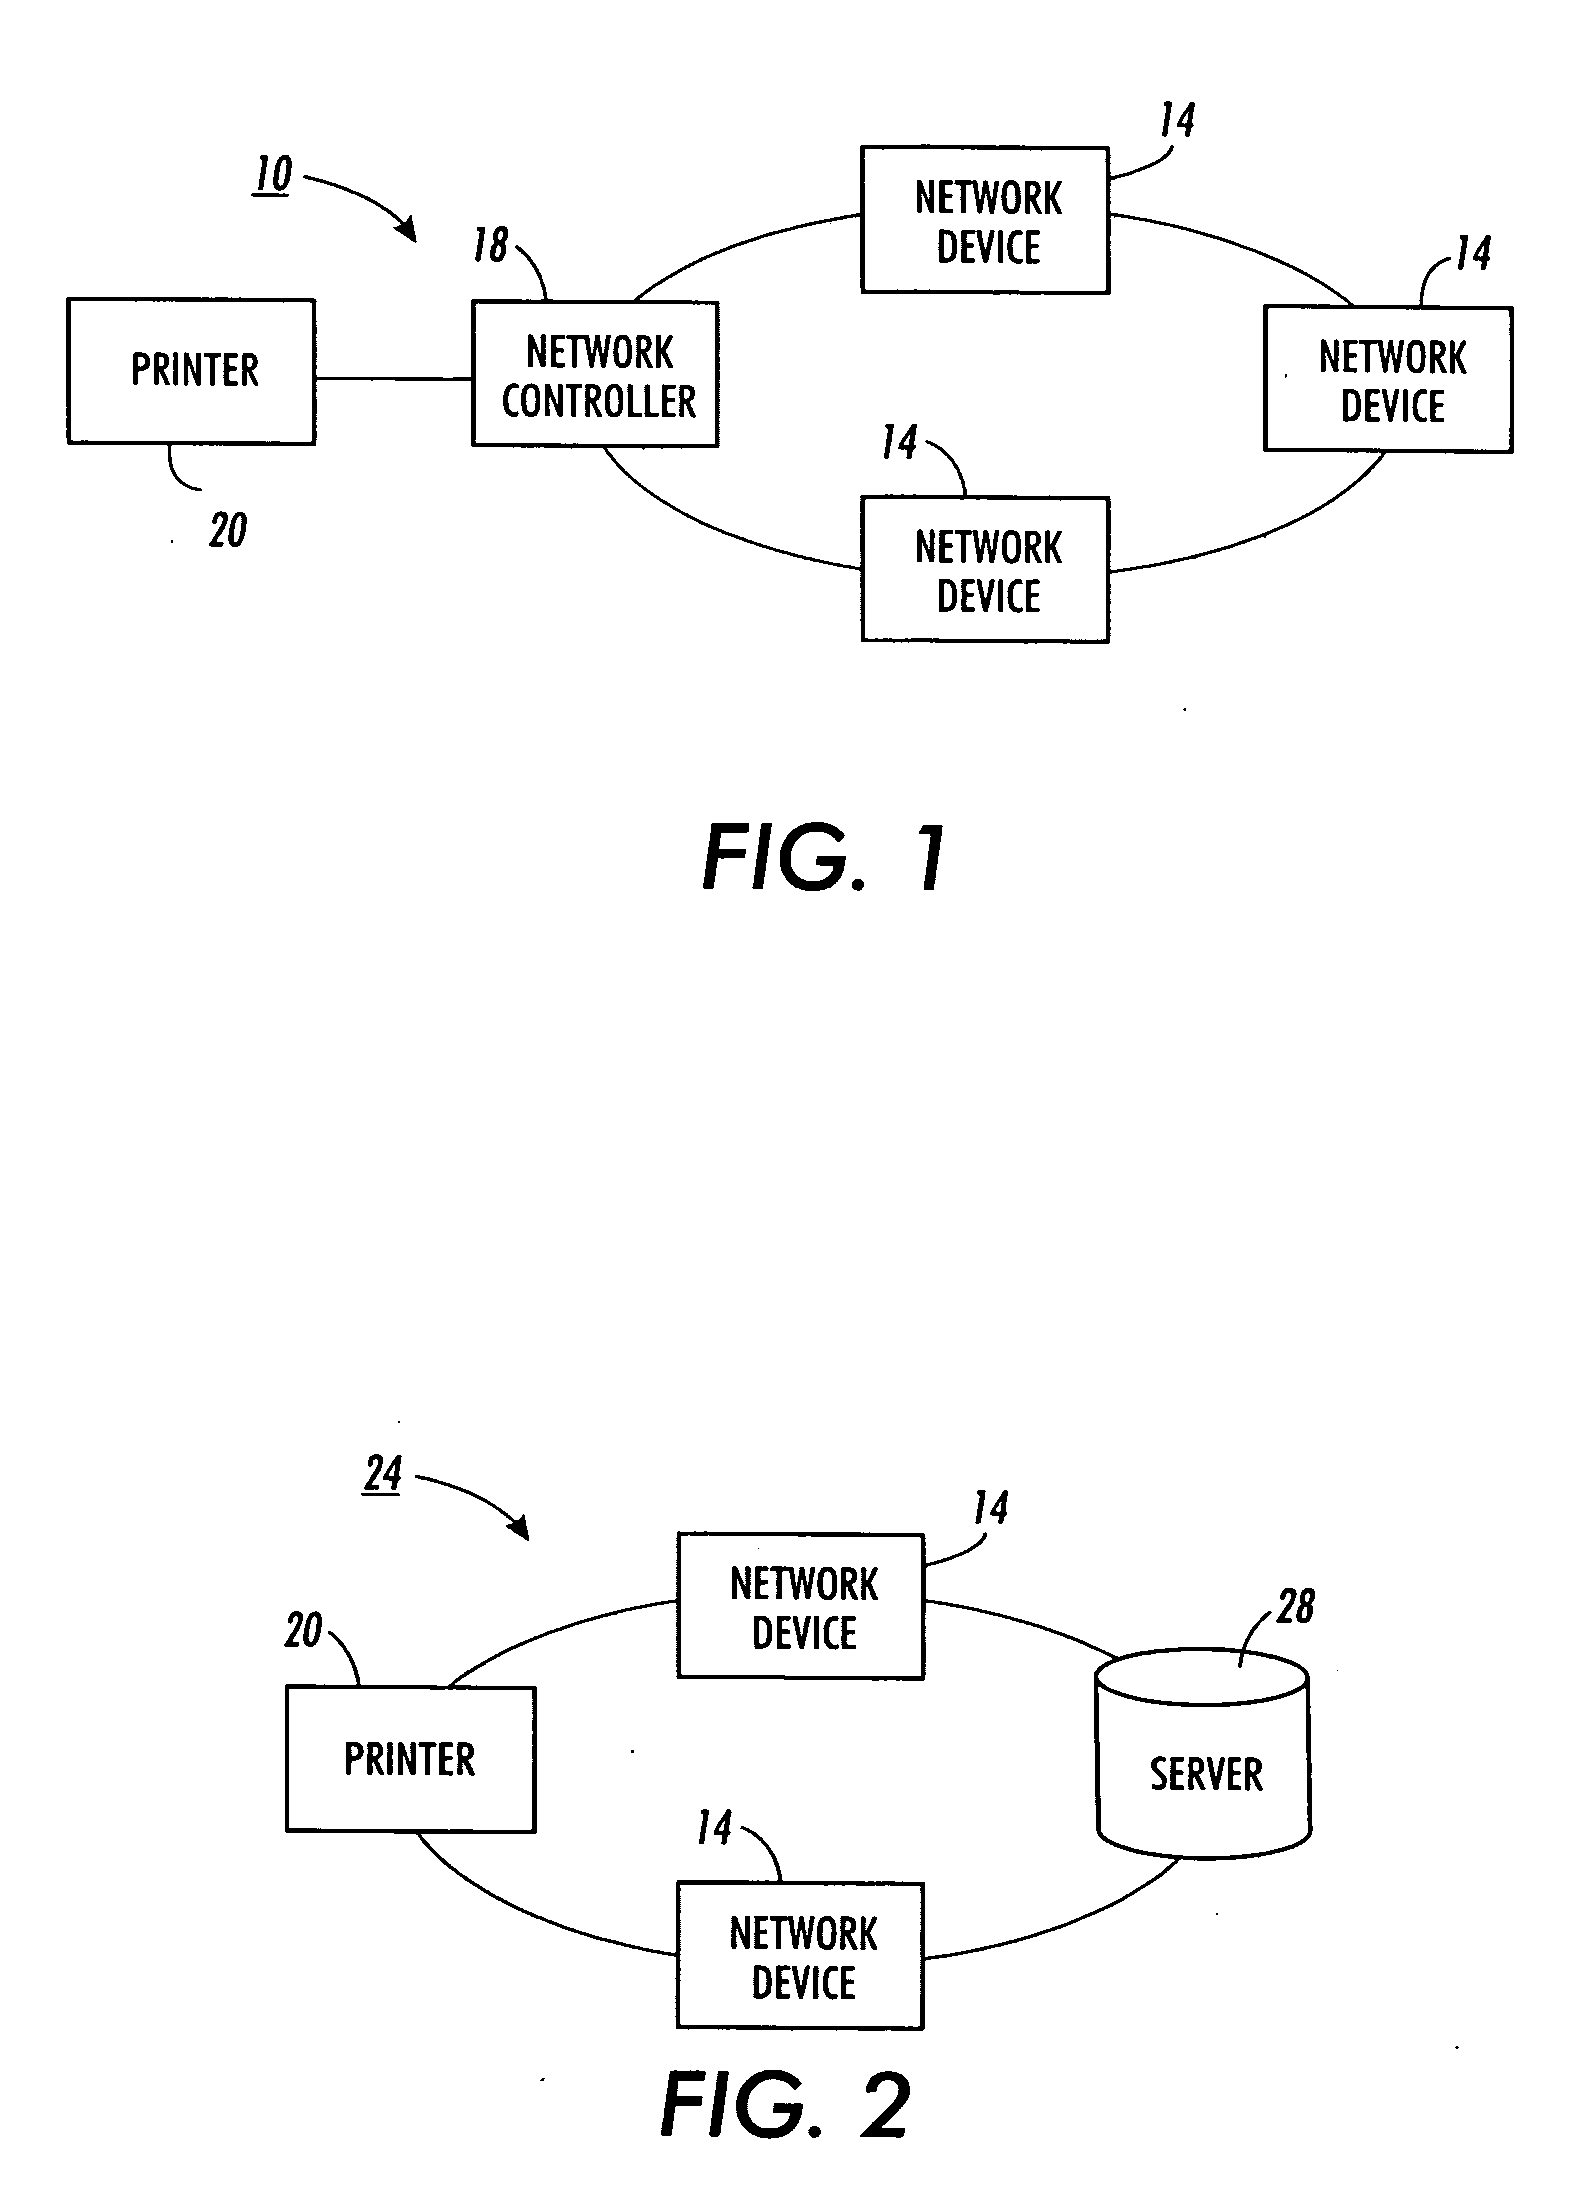 Method and system for managing print job files for a shared printer